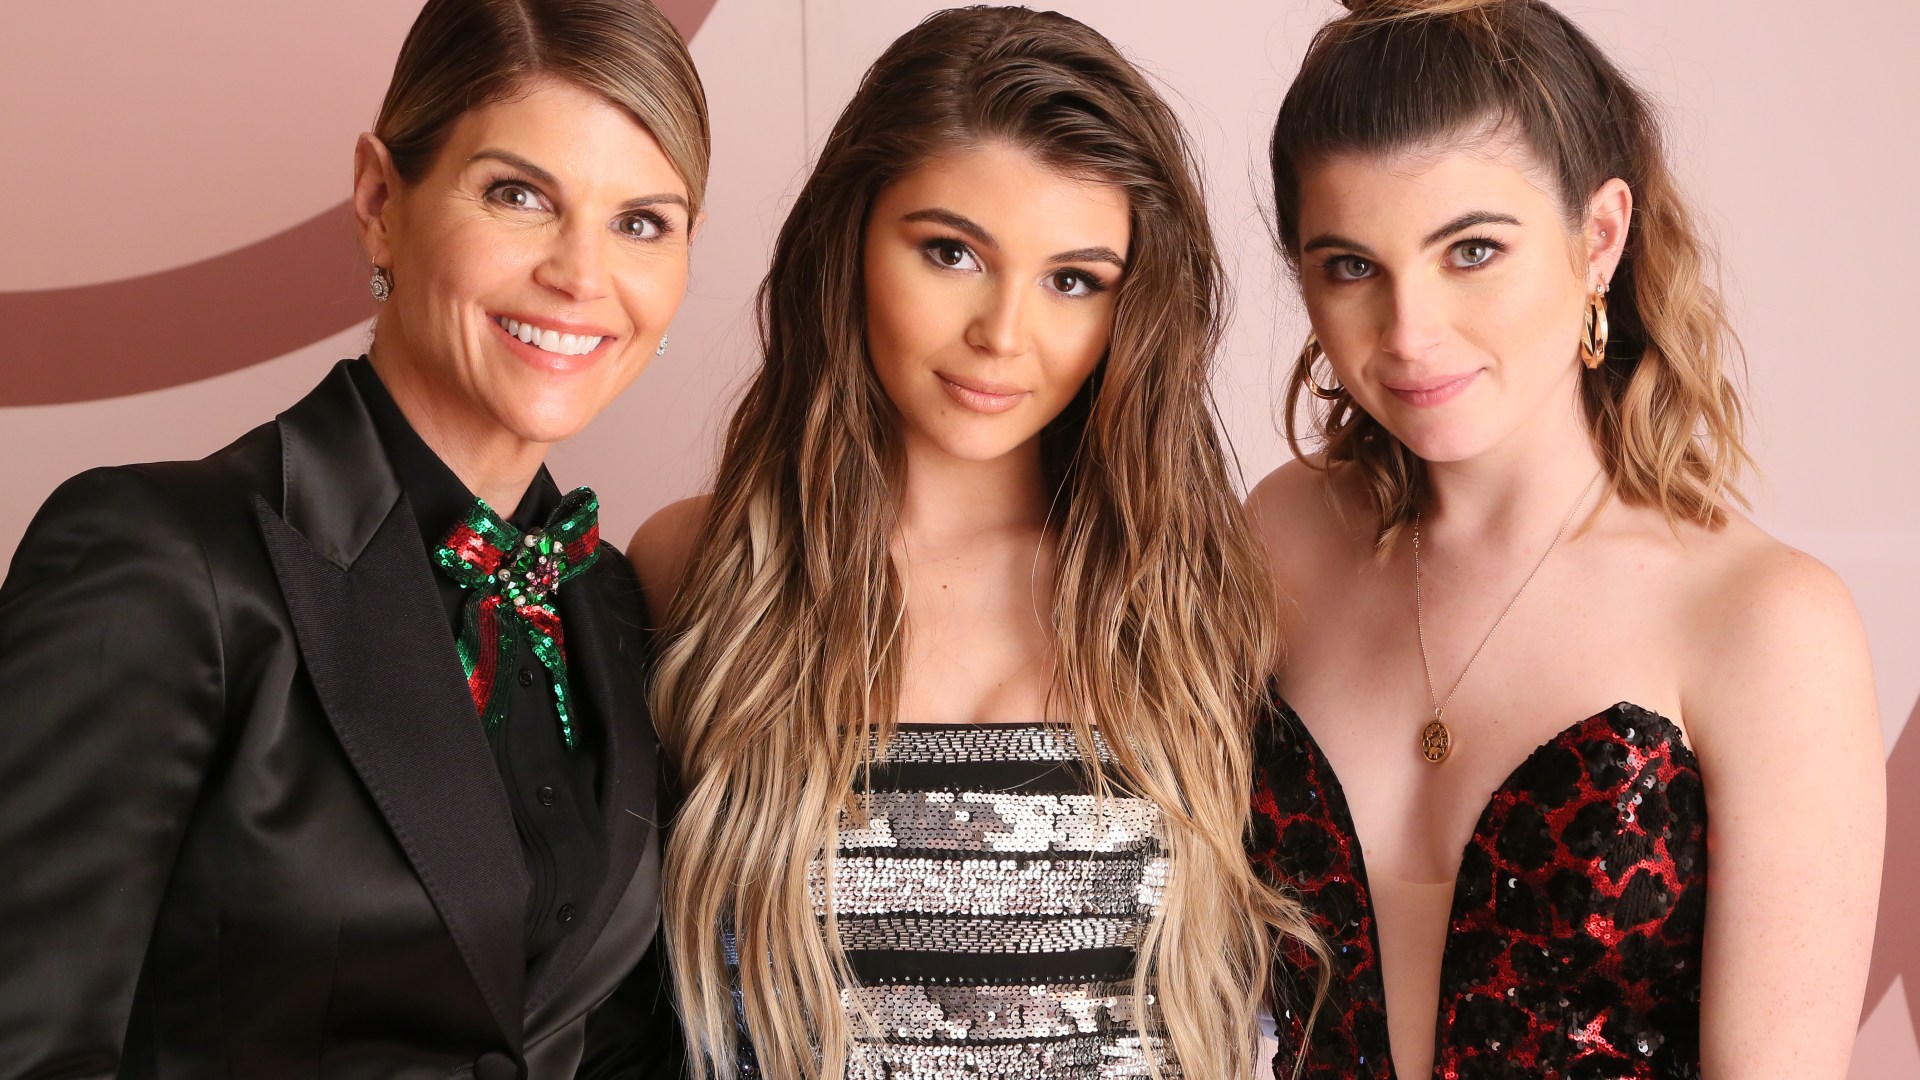 Lori Loughlins Daughters Look All Grown Up And Stunning In New Photos